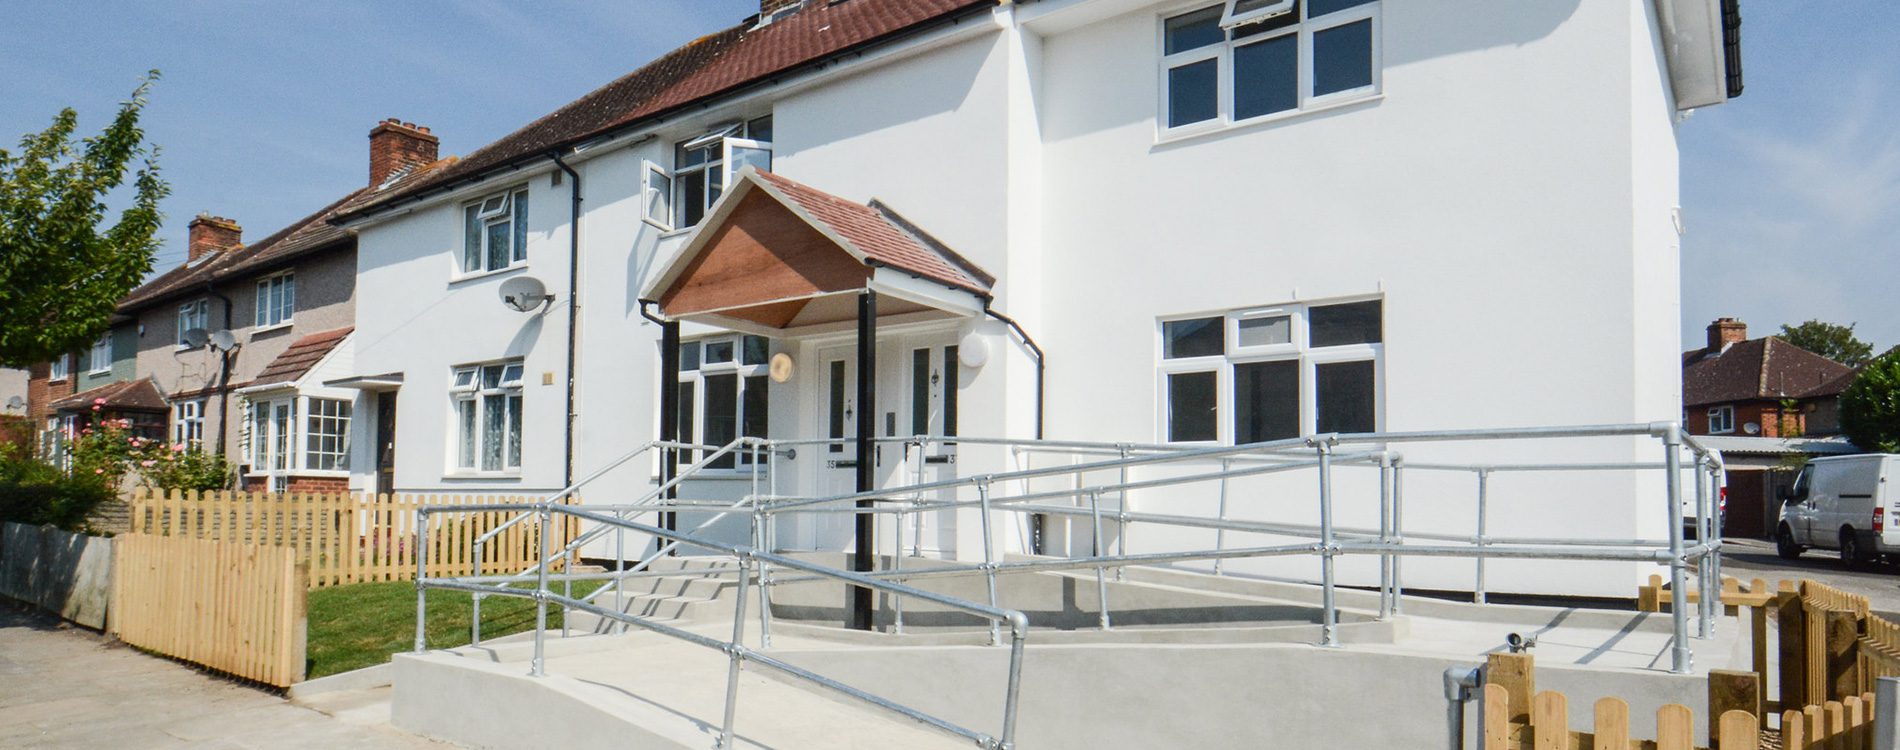 Conversions applied to a residential property to allow for disabled access via a ramp